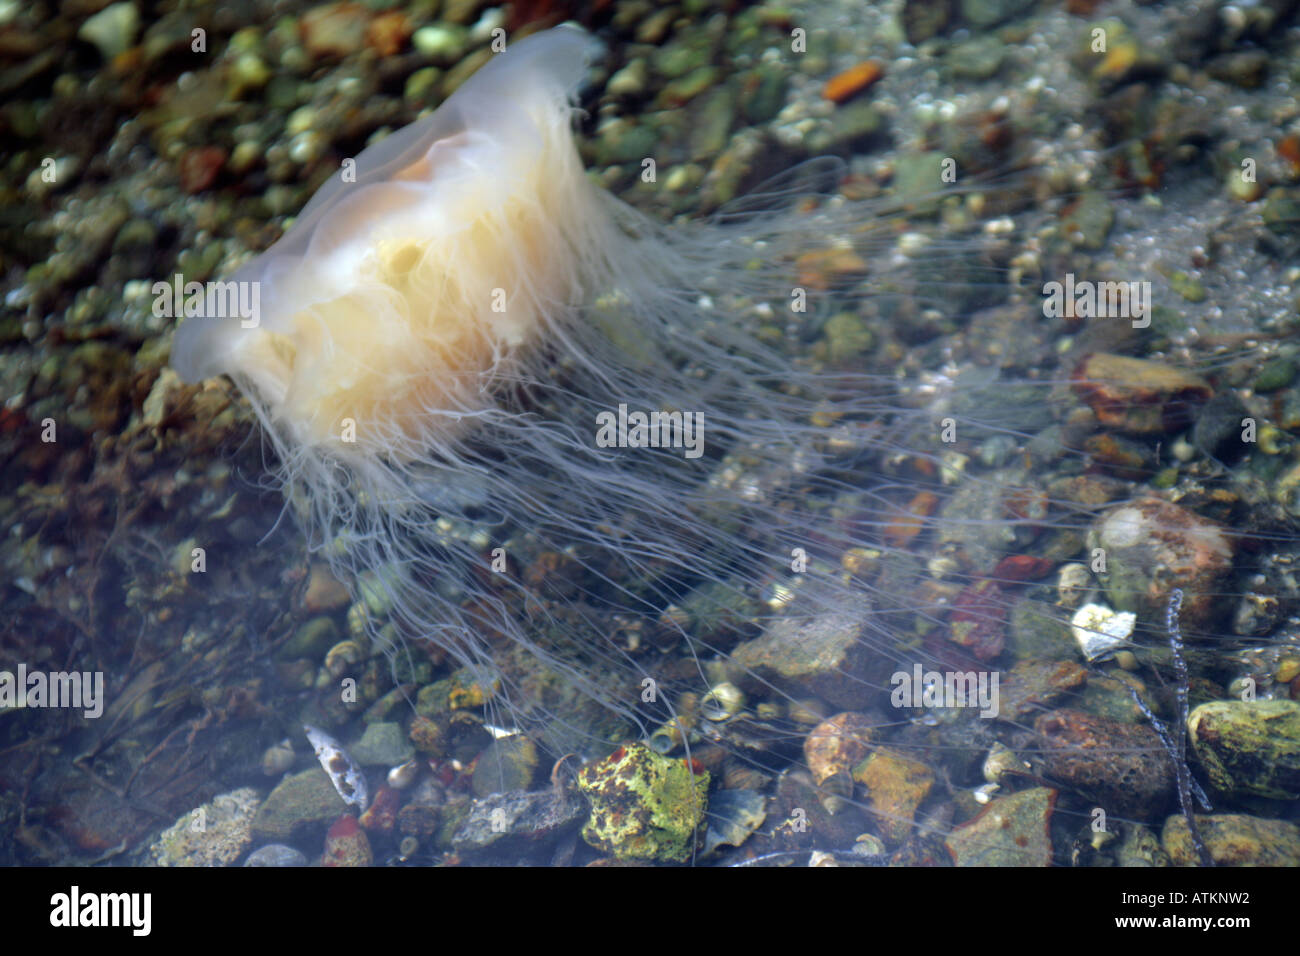 Lions mane jellyfish Cyanea capillata in clear shallow sea with pebbly seabed Stock Photo